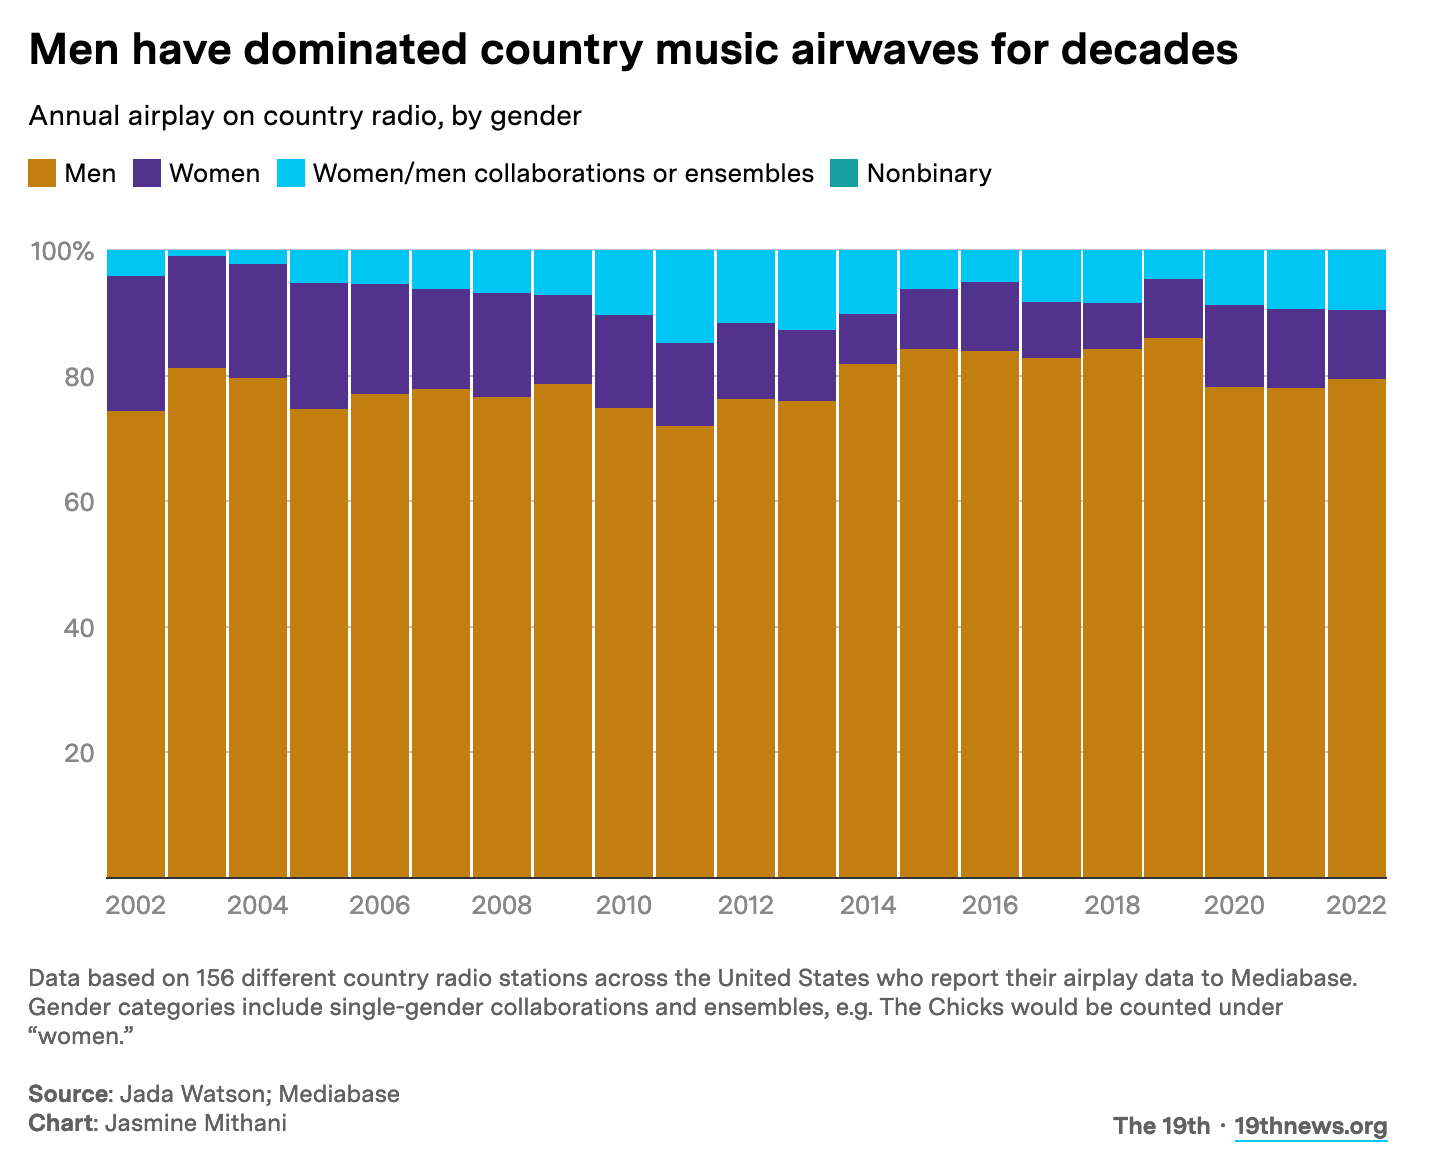 Stacked column chart showing annual airplay on country radio, by musician gender, from 2002 to 2022. Musicians who are men make up between 72 and 86 percent of annual airplay, while music by women is between 7 and 21 percent. Nonbinary performers make up less than 1 percent of annual airplay, and the rest is multigender collaborations. There is no overarching pattern of growth, though the shares have stayed stagnant 2020-2022.